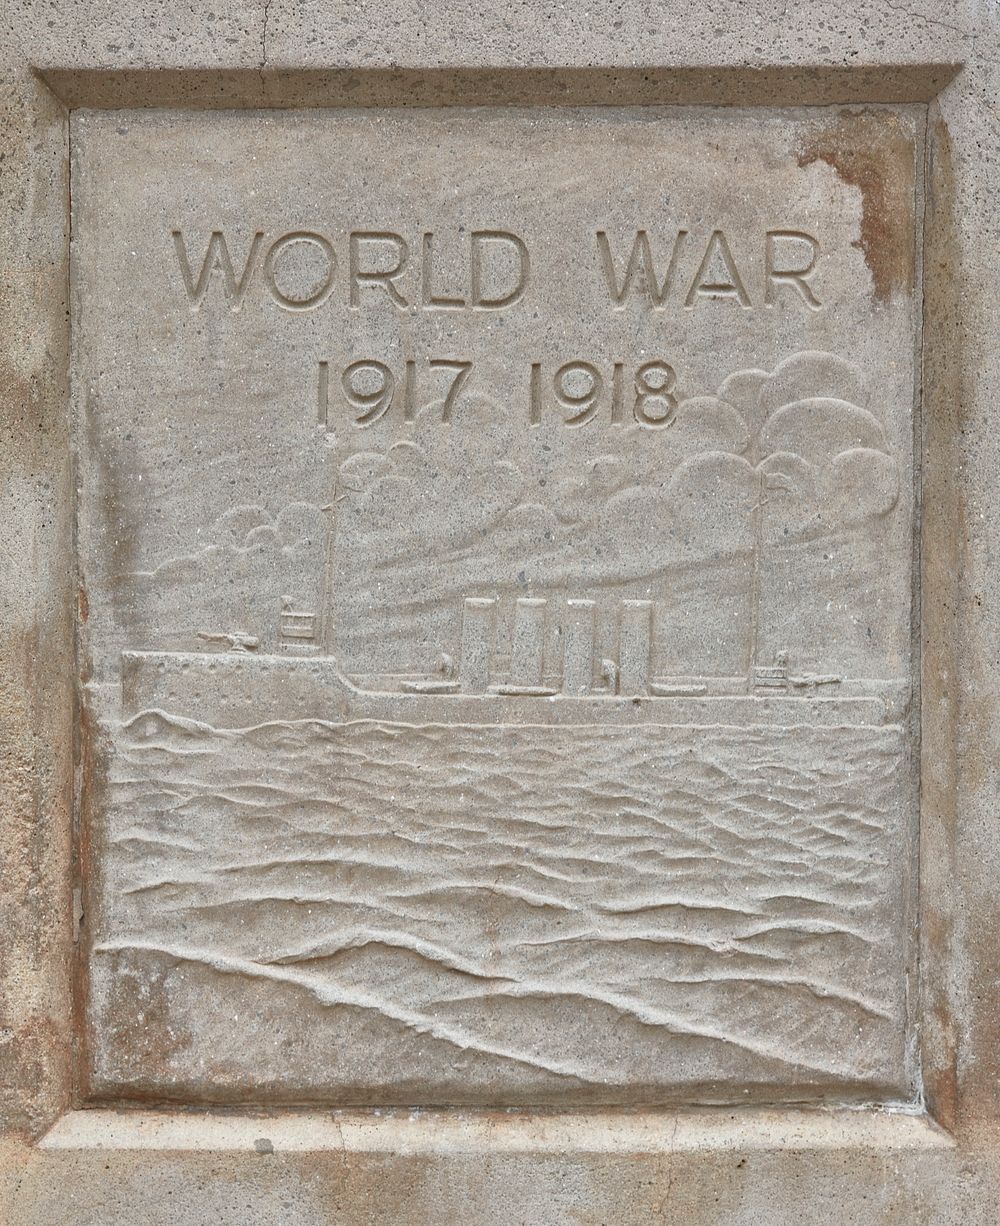                         One of the four tablets beneath depictions of soldiers from four U.S. foreign wars on War and…